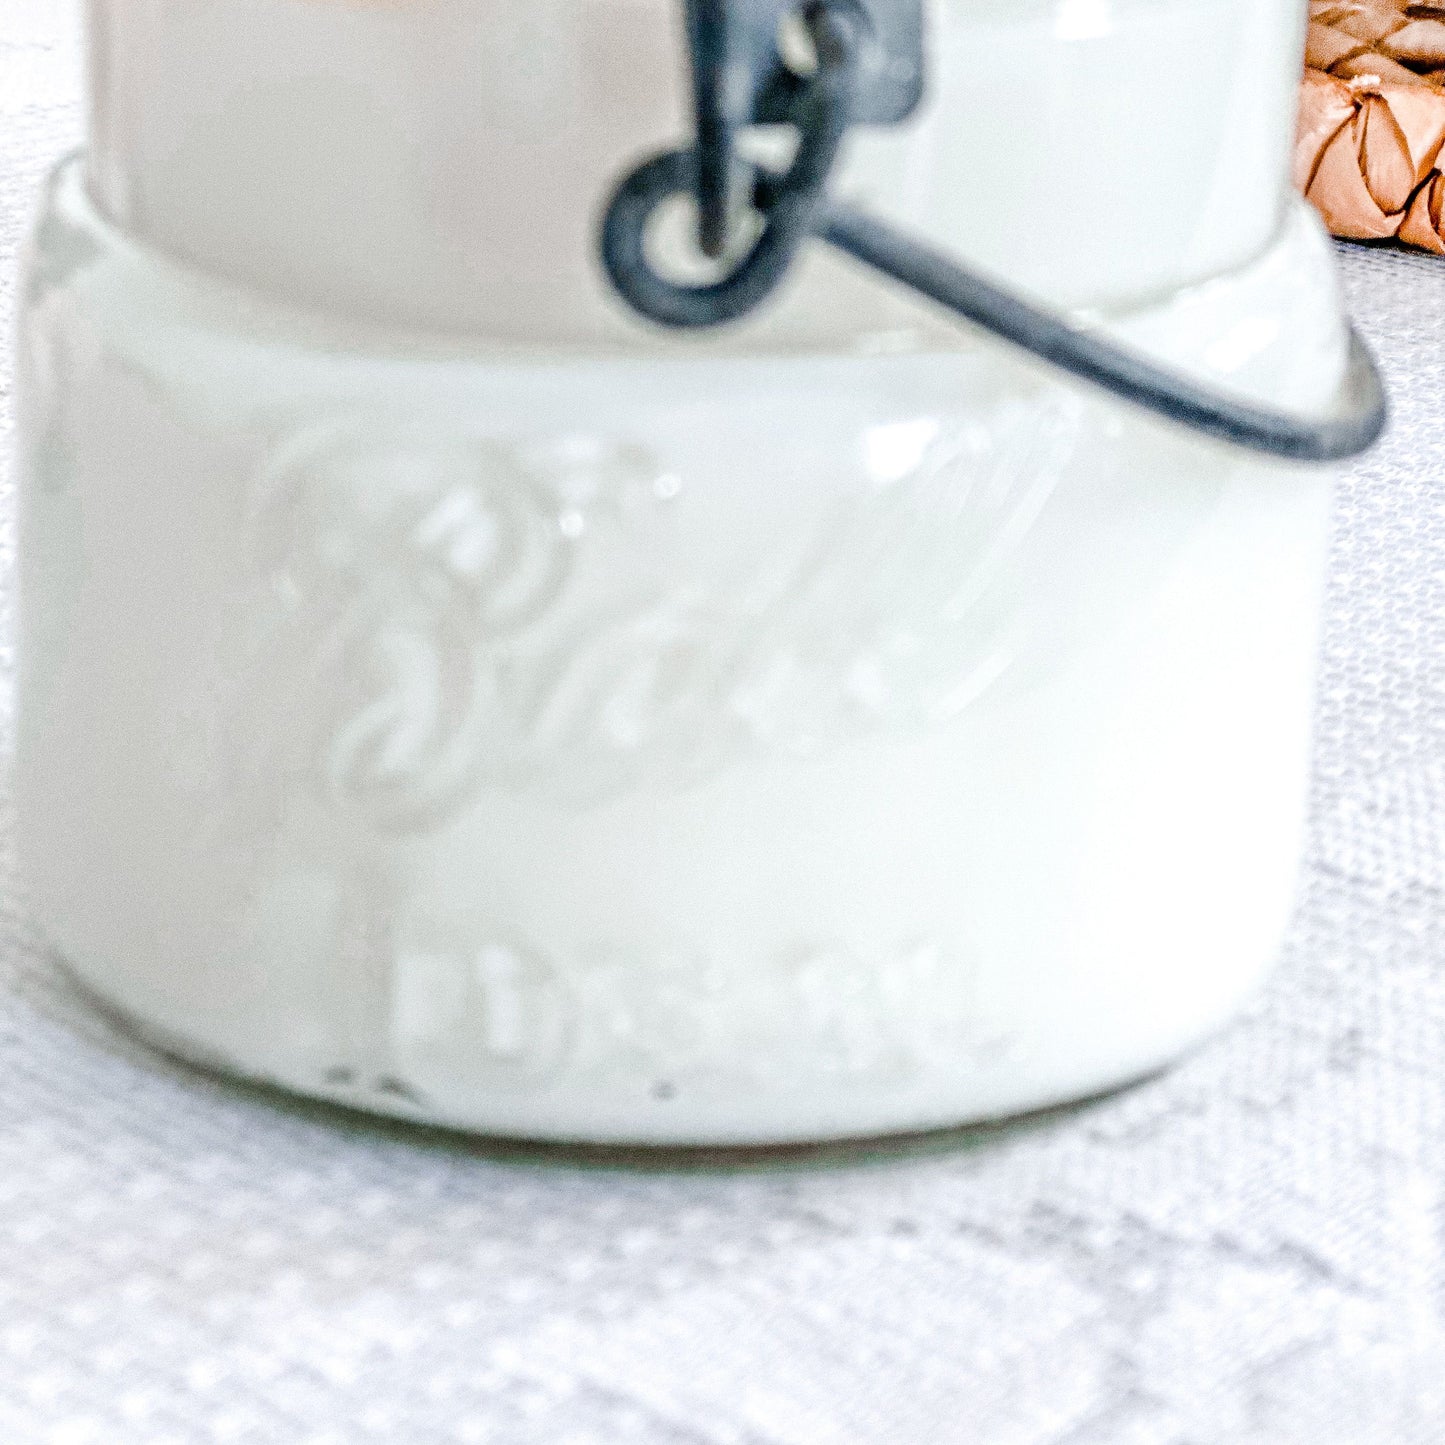 Scented Candle in Vintage Half-Pint Mason Jar